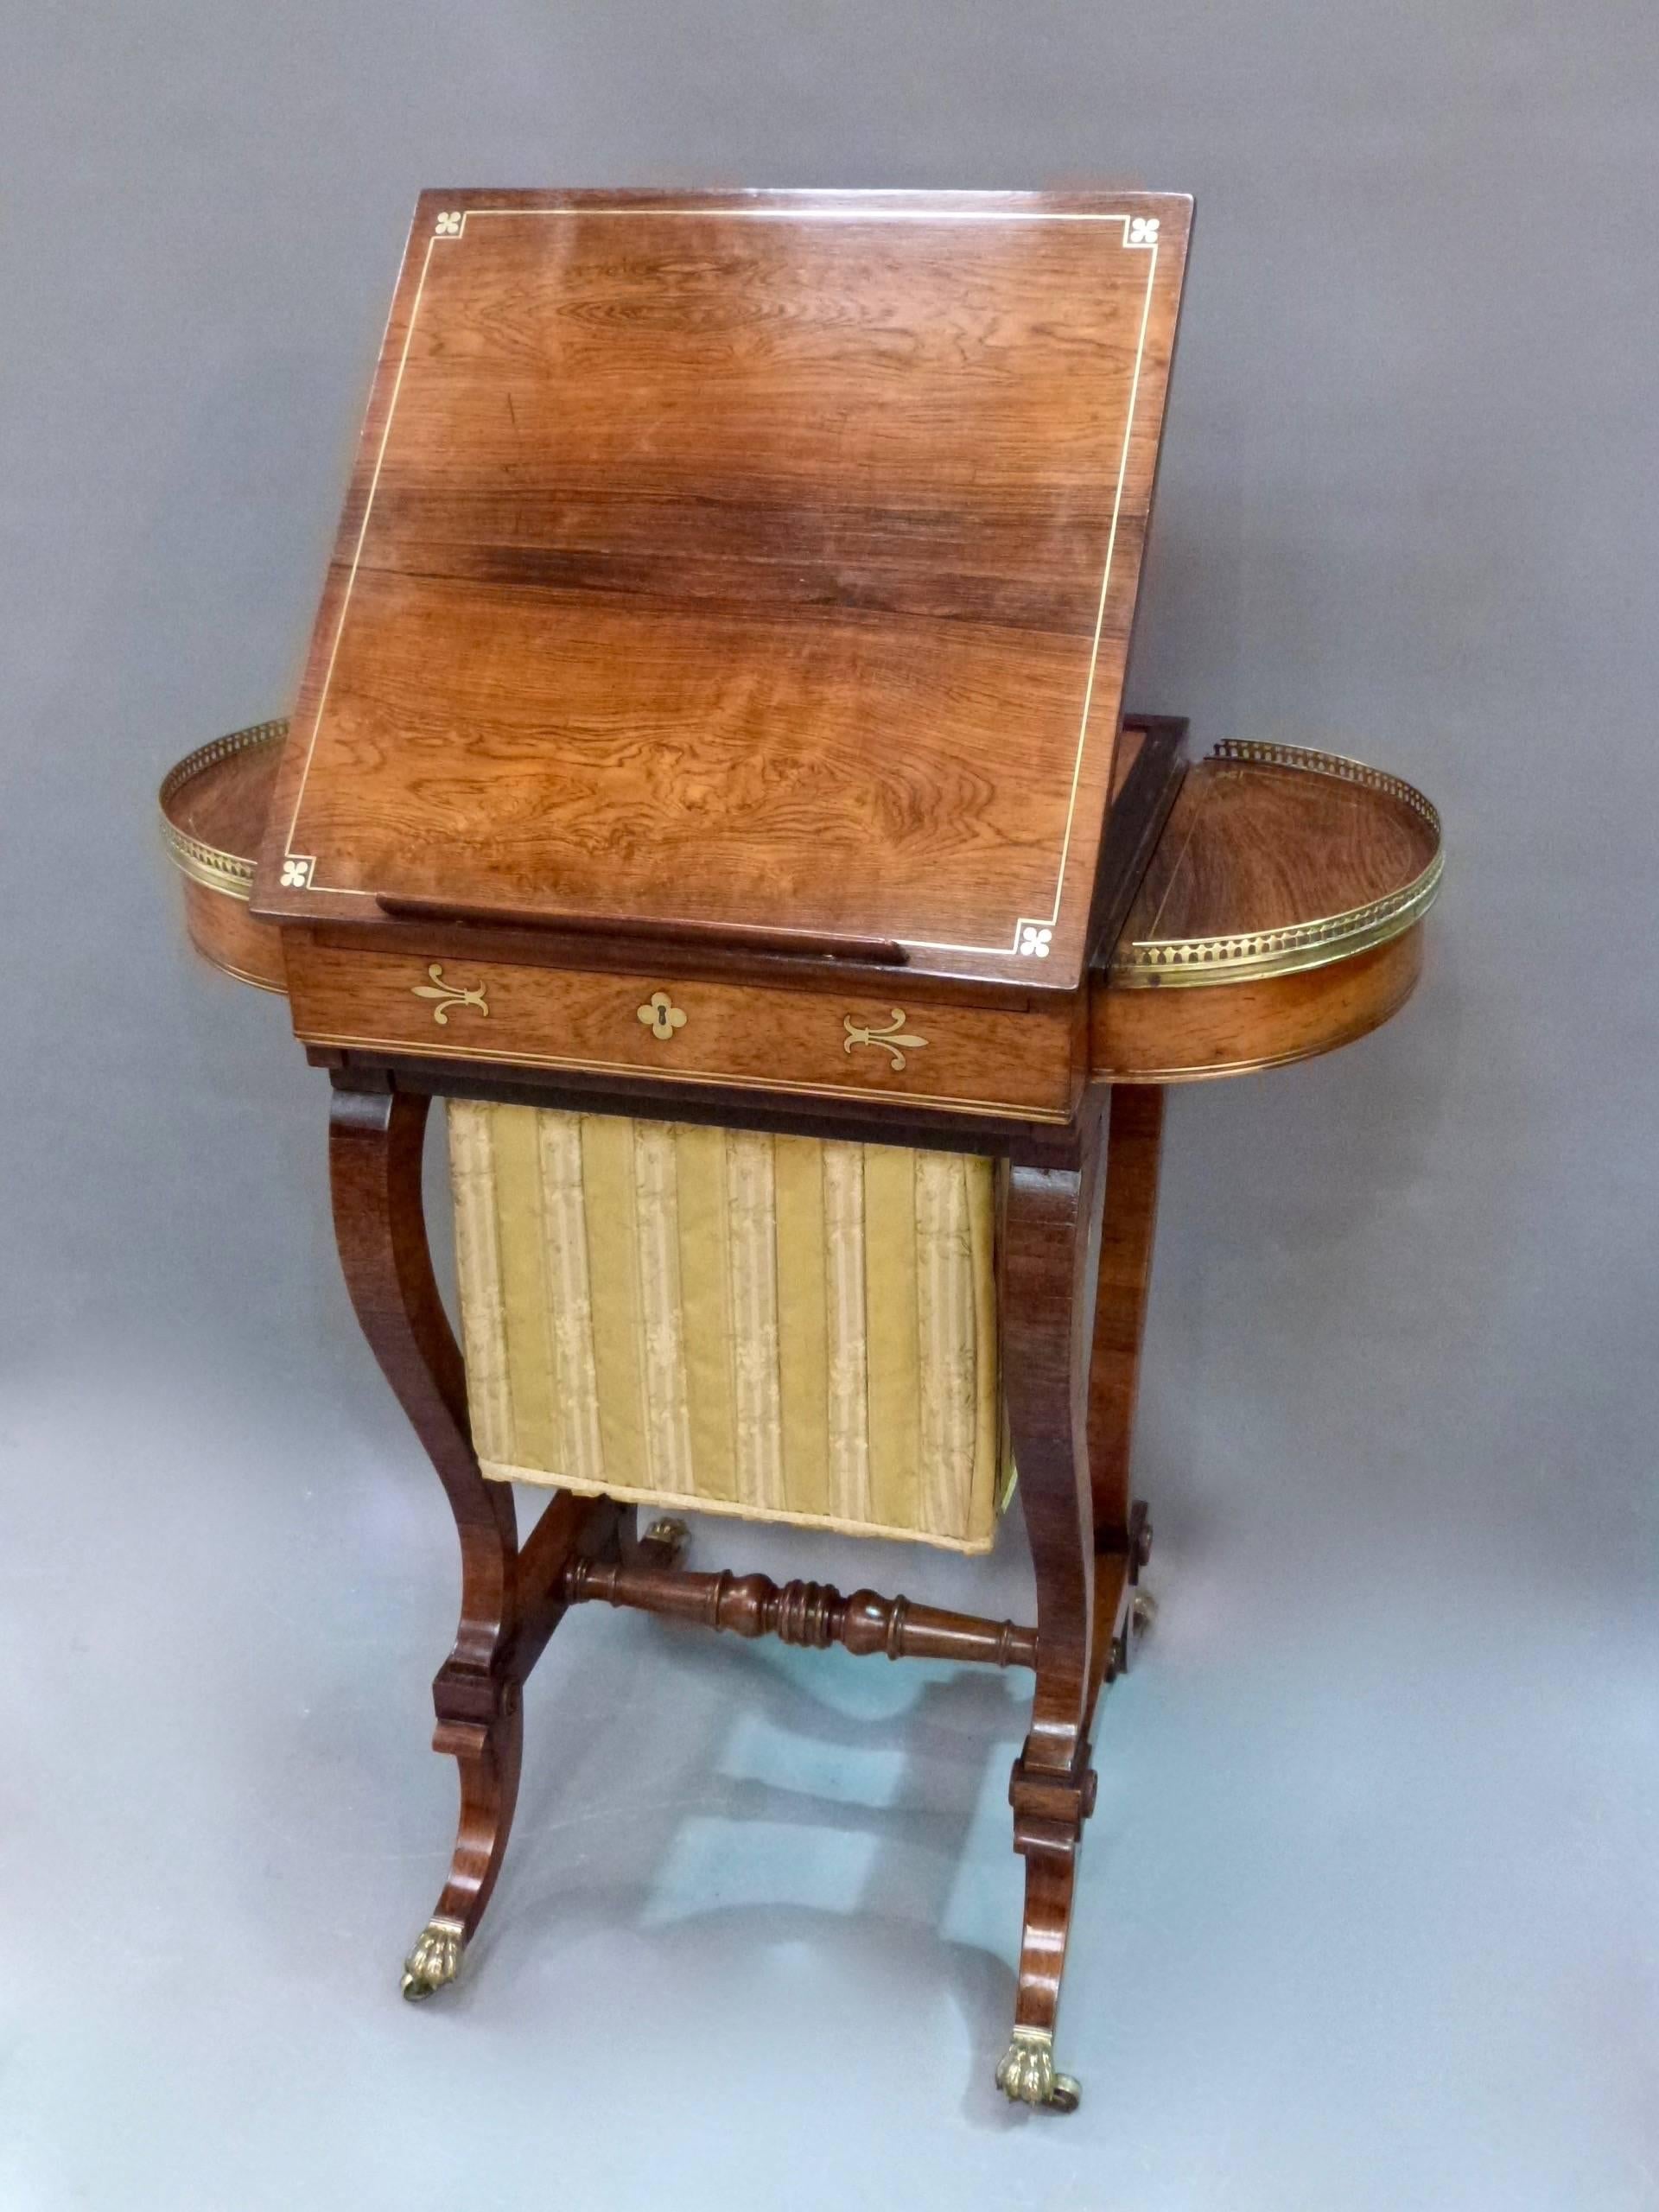 A fine Regency rosewood brass inlaid occasional table with chess board, backgammon board, cribbage board, sewing bag, reading stand on splayed
legs.